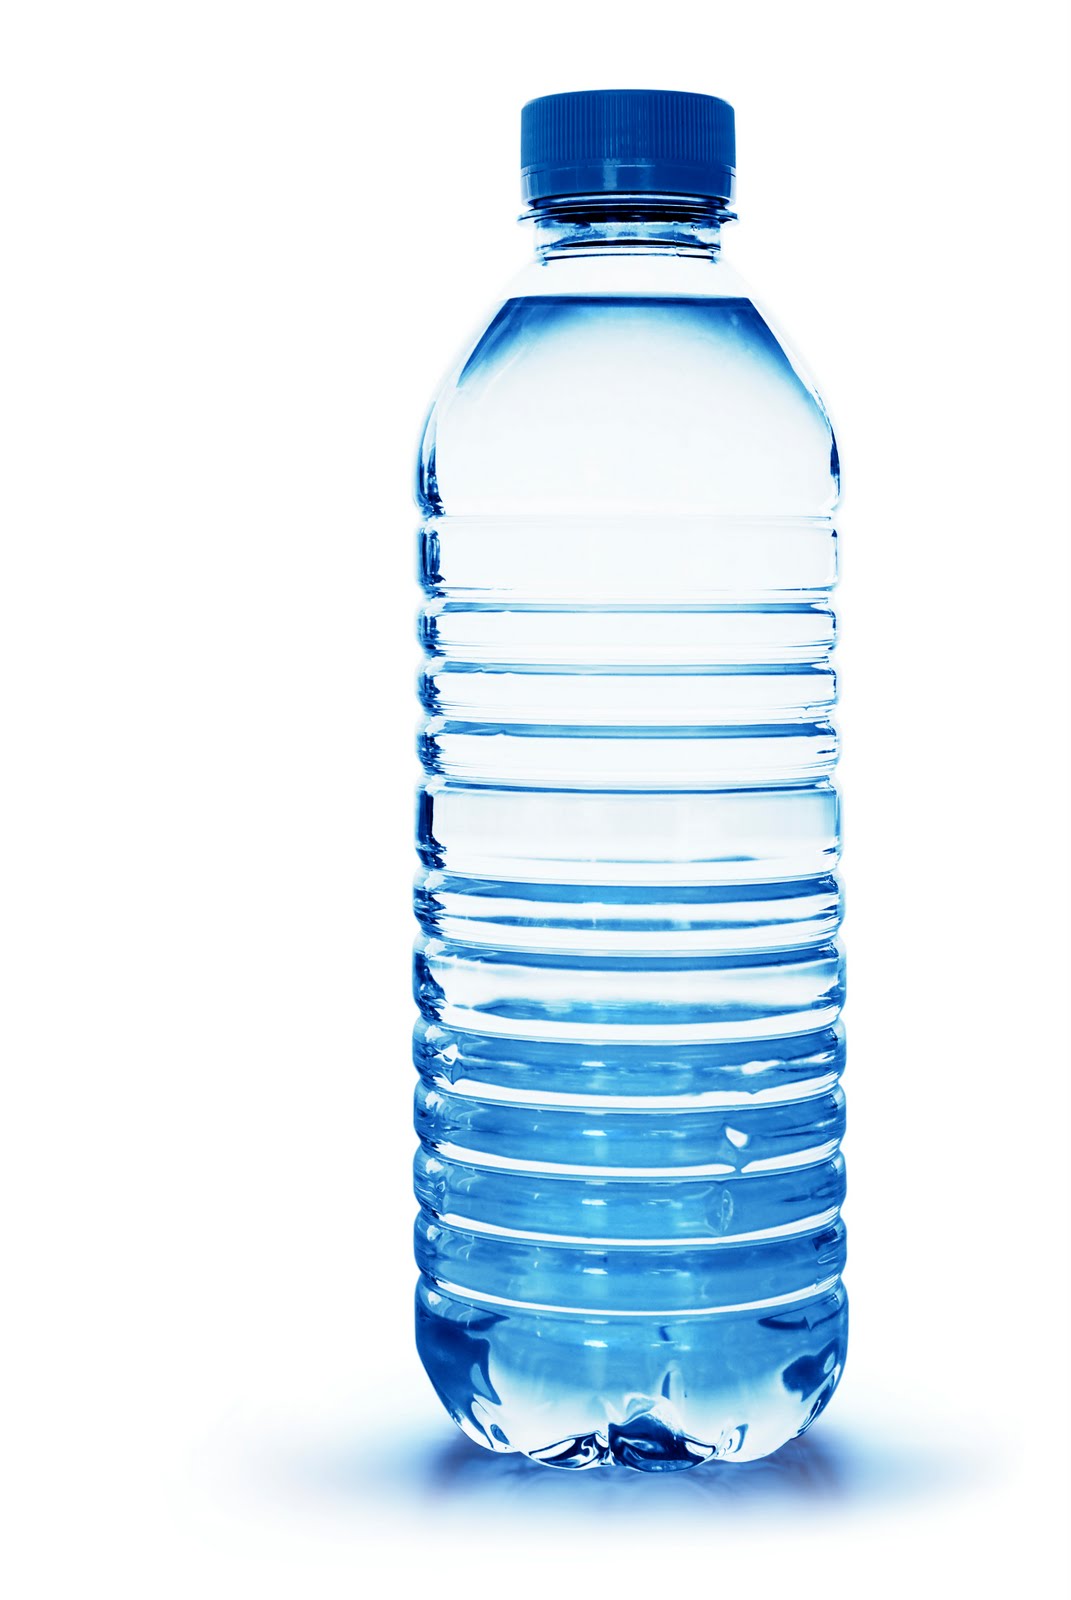 Free Plastic Bottle Cliparts, Download Free Clip Art, Free